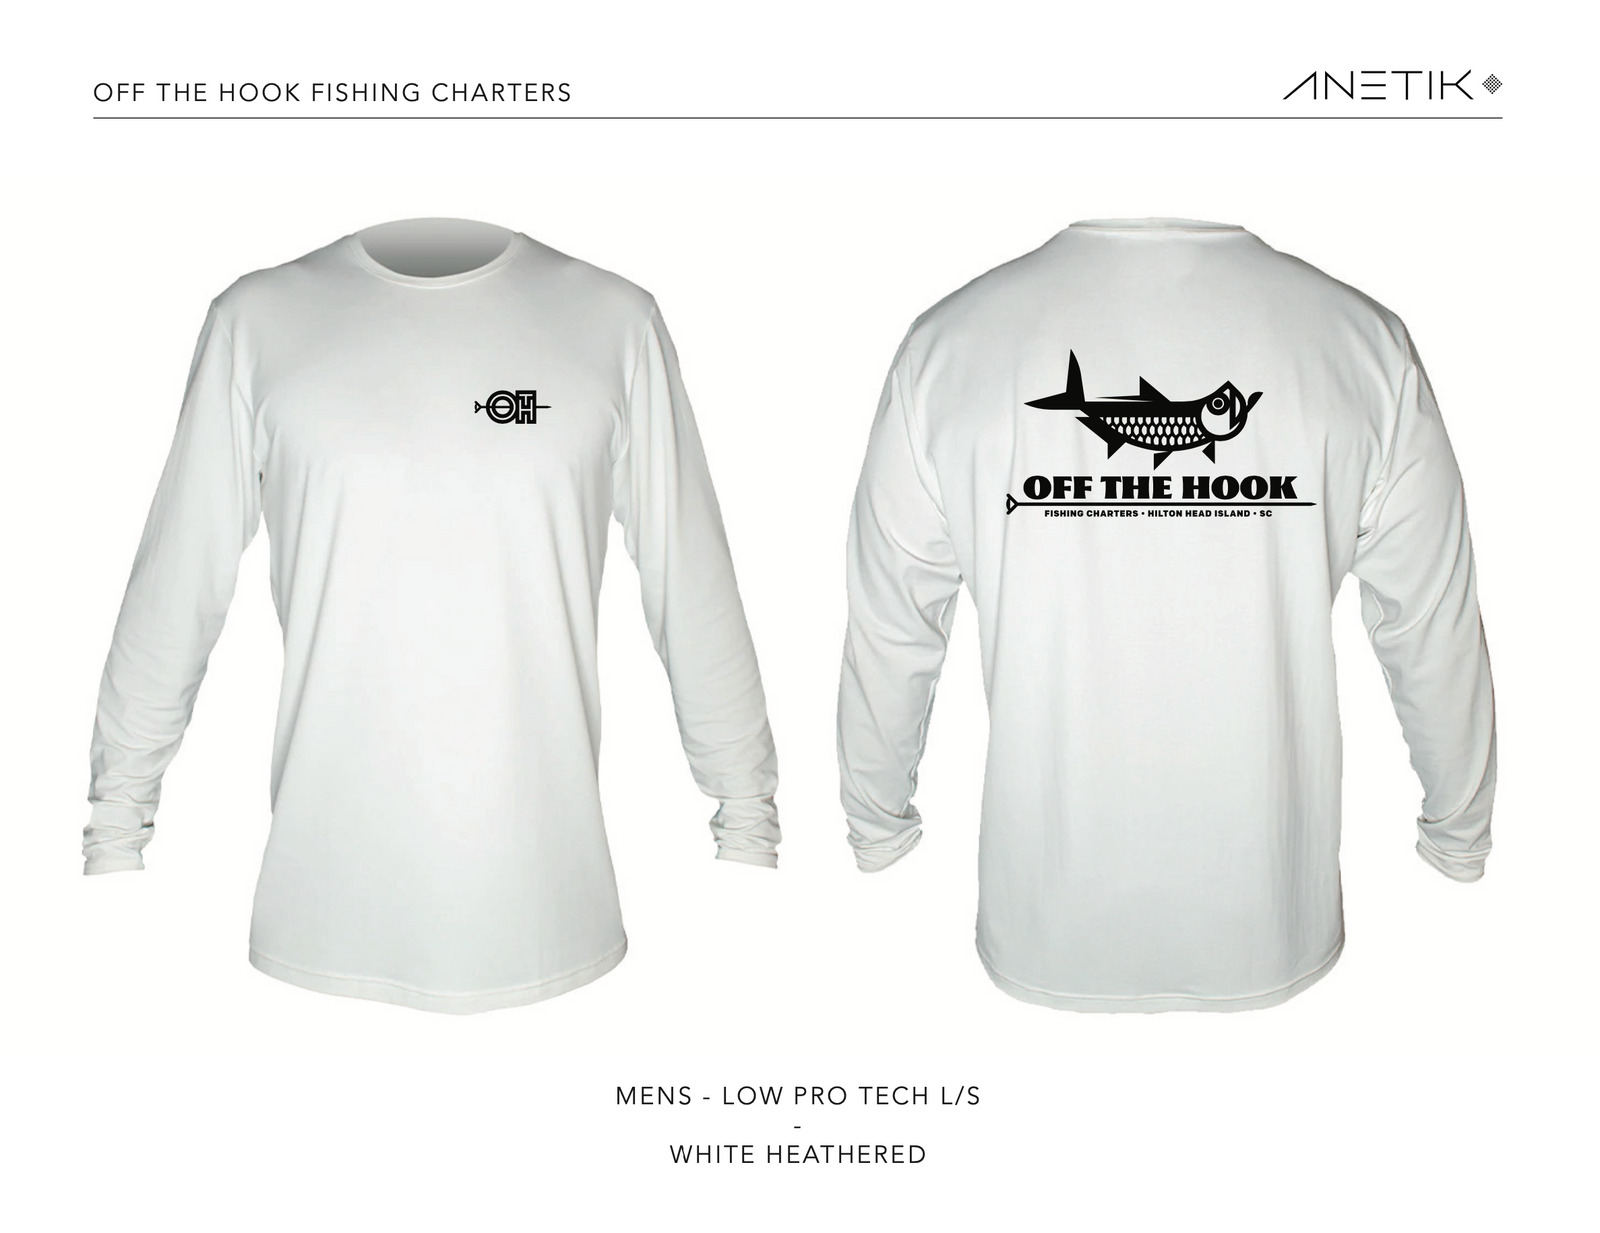 OFF THE HOOK Shop - Off The Hook Fishing Charters